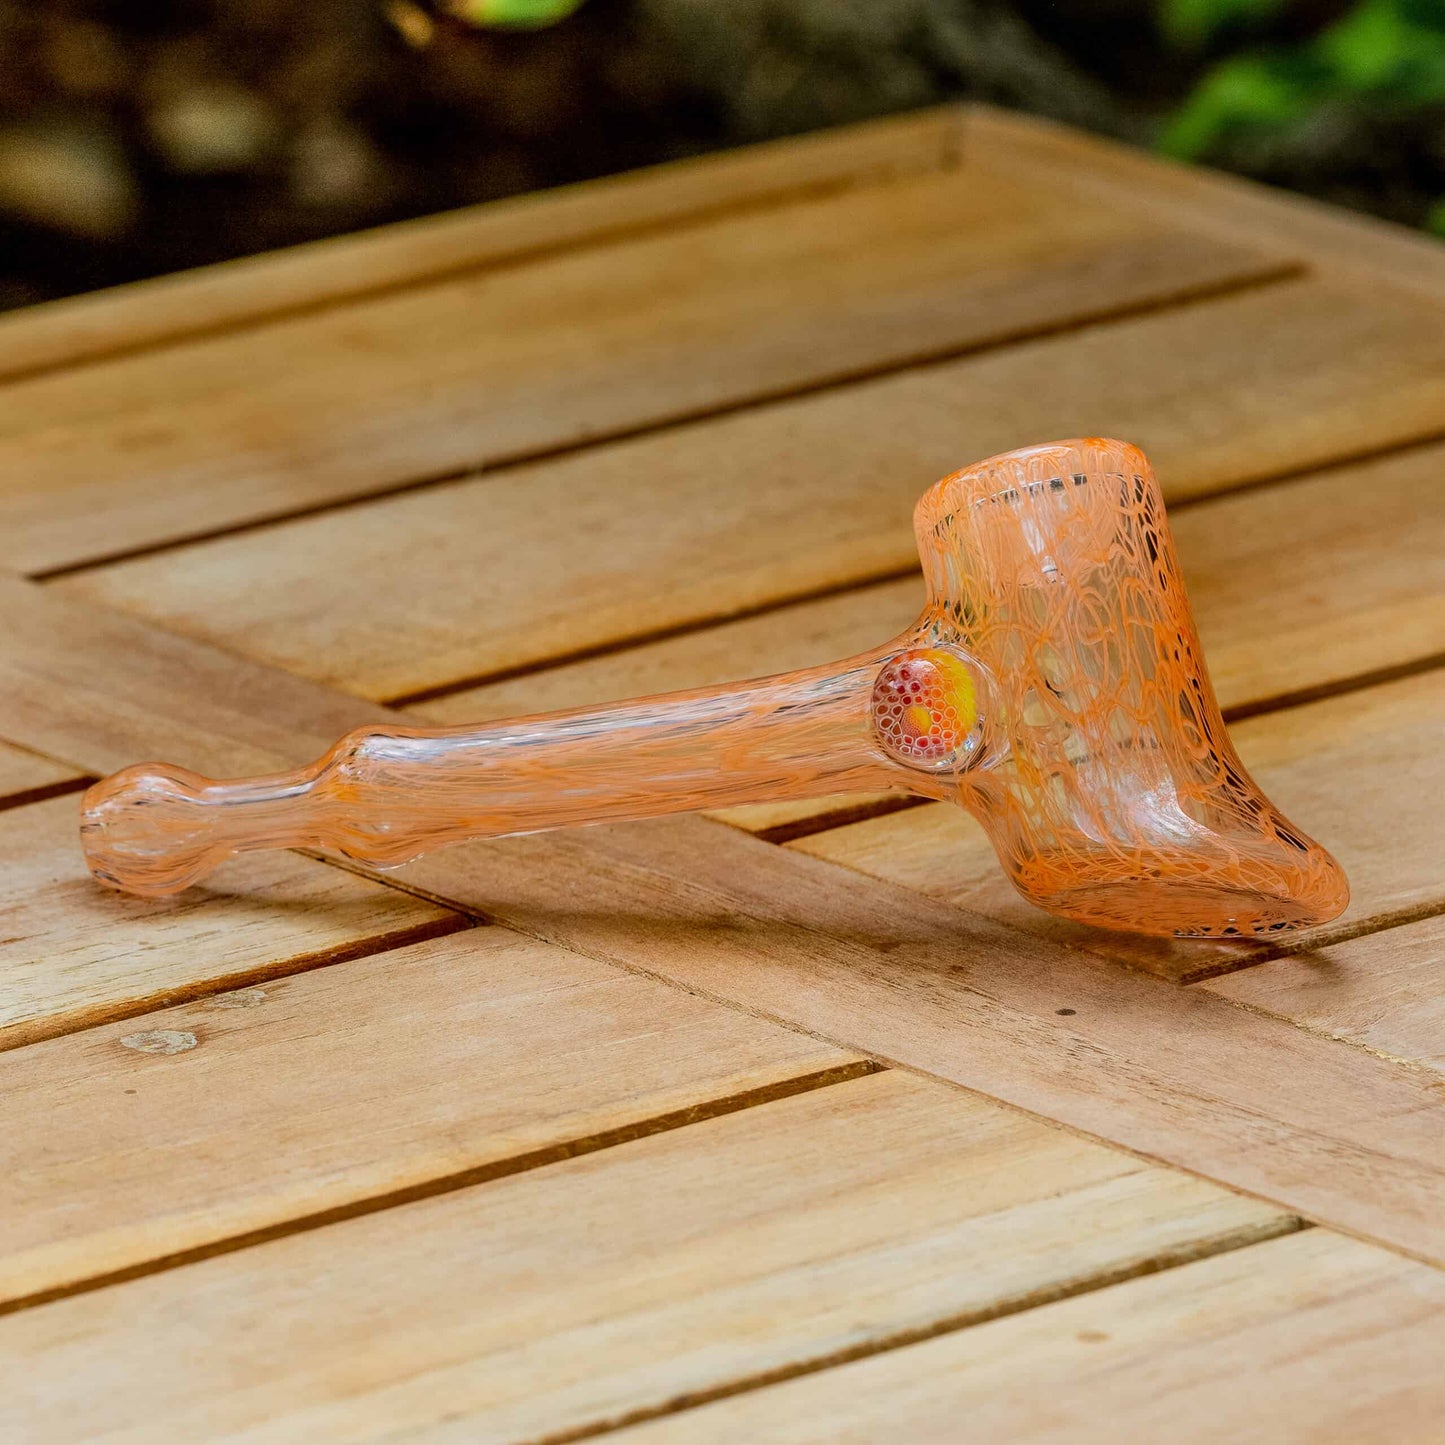 exquisite design of the Lava Fully Worked Hammer Dry Pipe (with milli) by Snoopy Glass